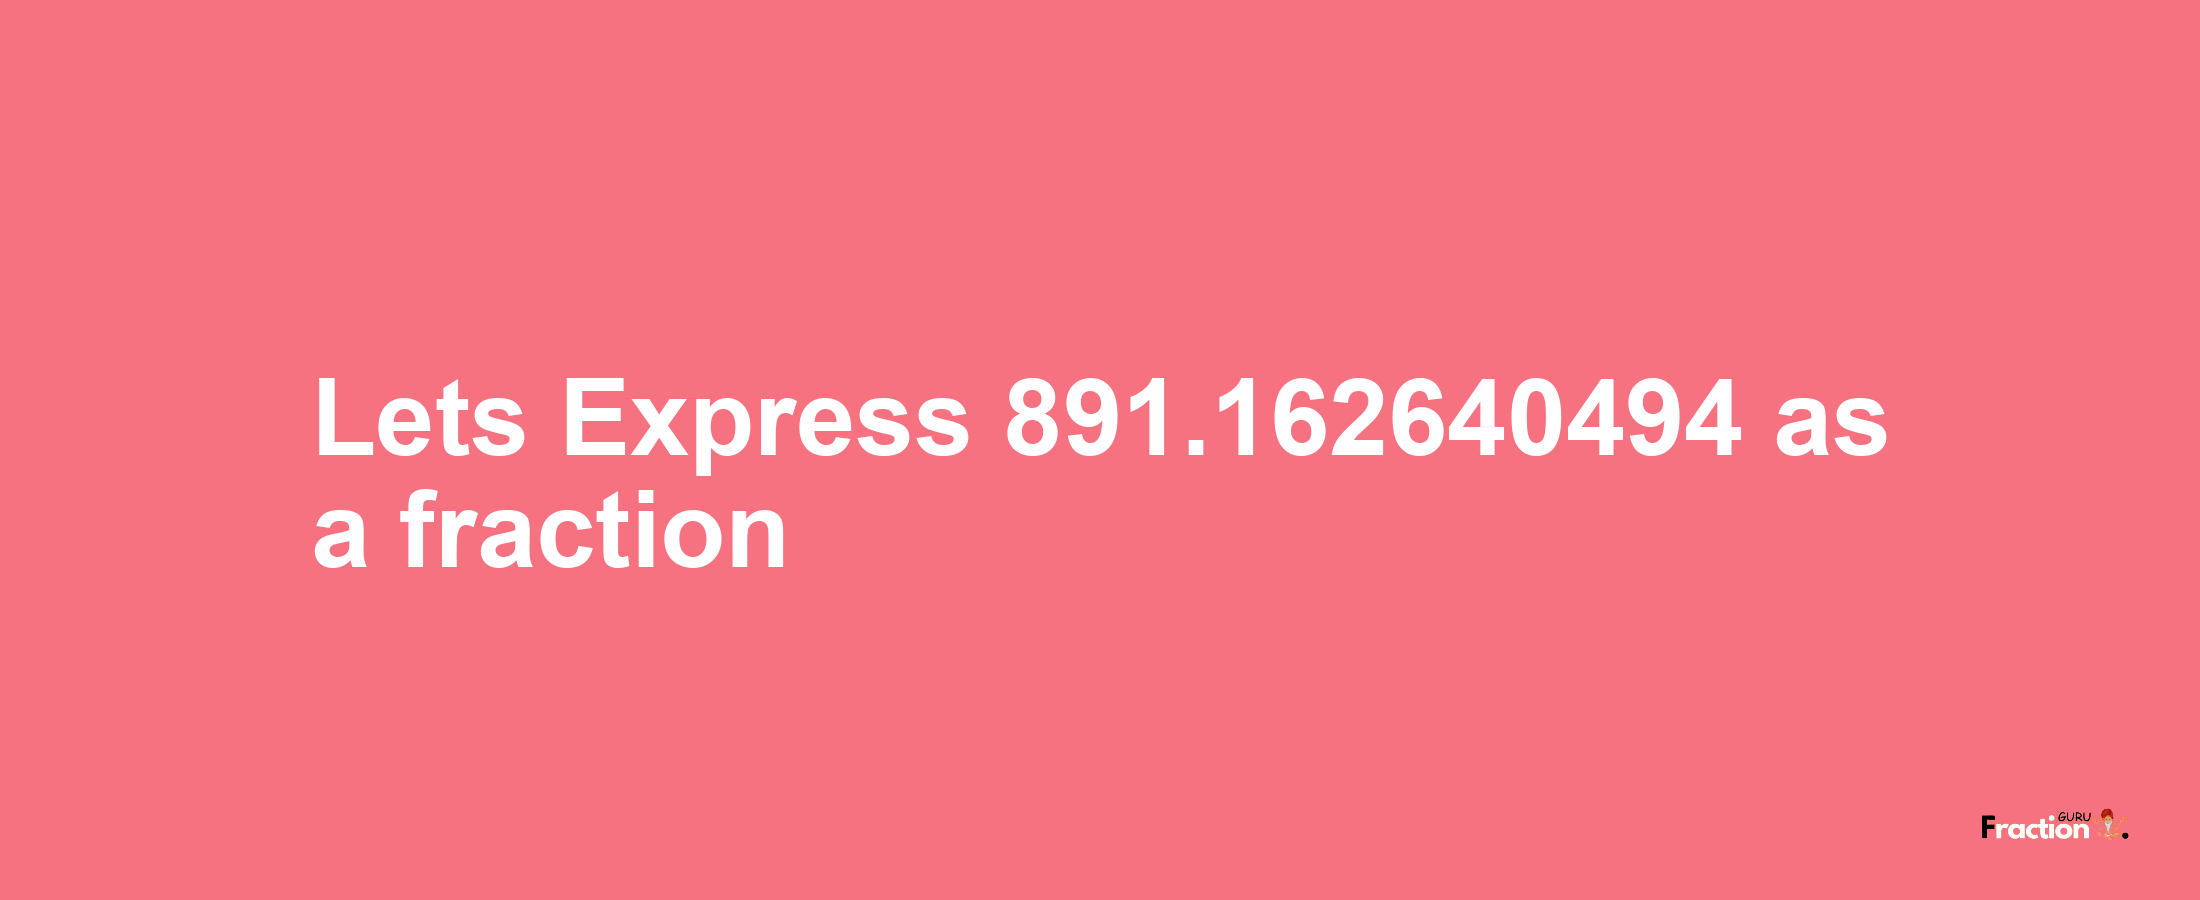 Lets Express 891.162640494 as afraction